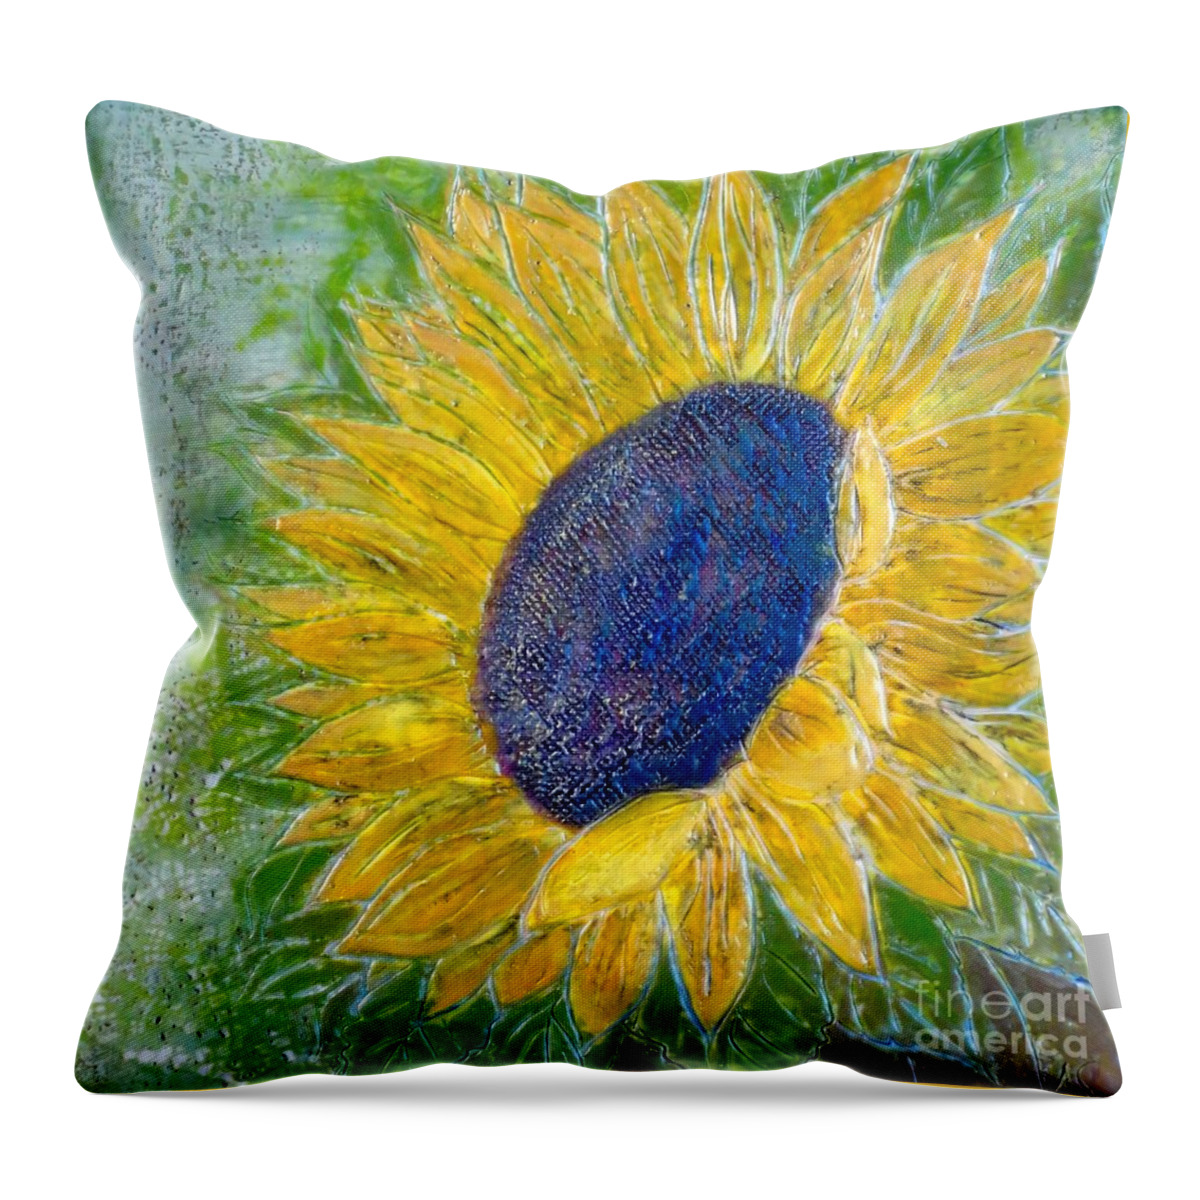 Sun Flower Sunflower Praises Flower Painting Art Yellow Green Encaustic Wax Beeswax Carved Texture Amy Stielstra Fine Art Happy Sunshine Glow Throw Pillow featuring the painting Sunflower Praises by Amy Stielstra